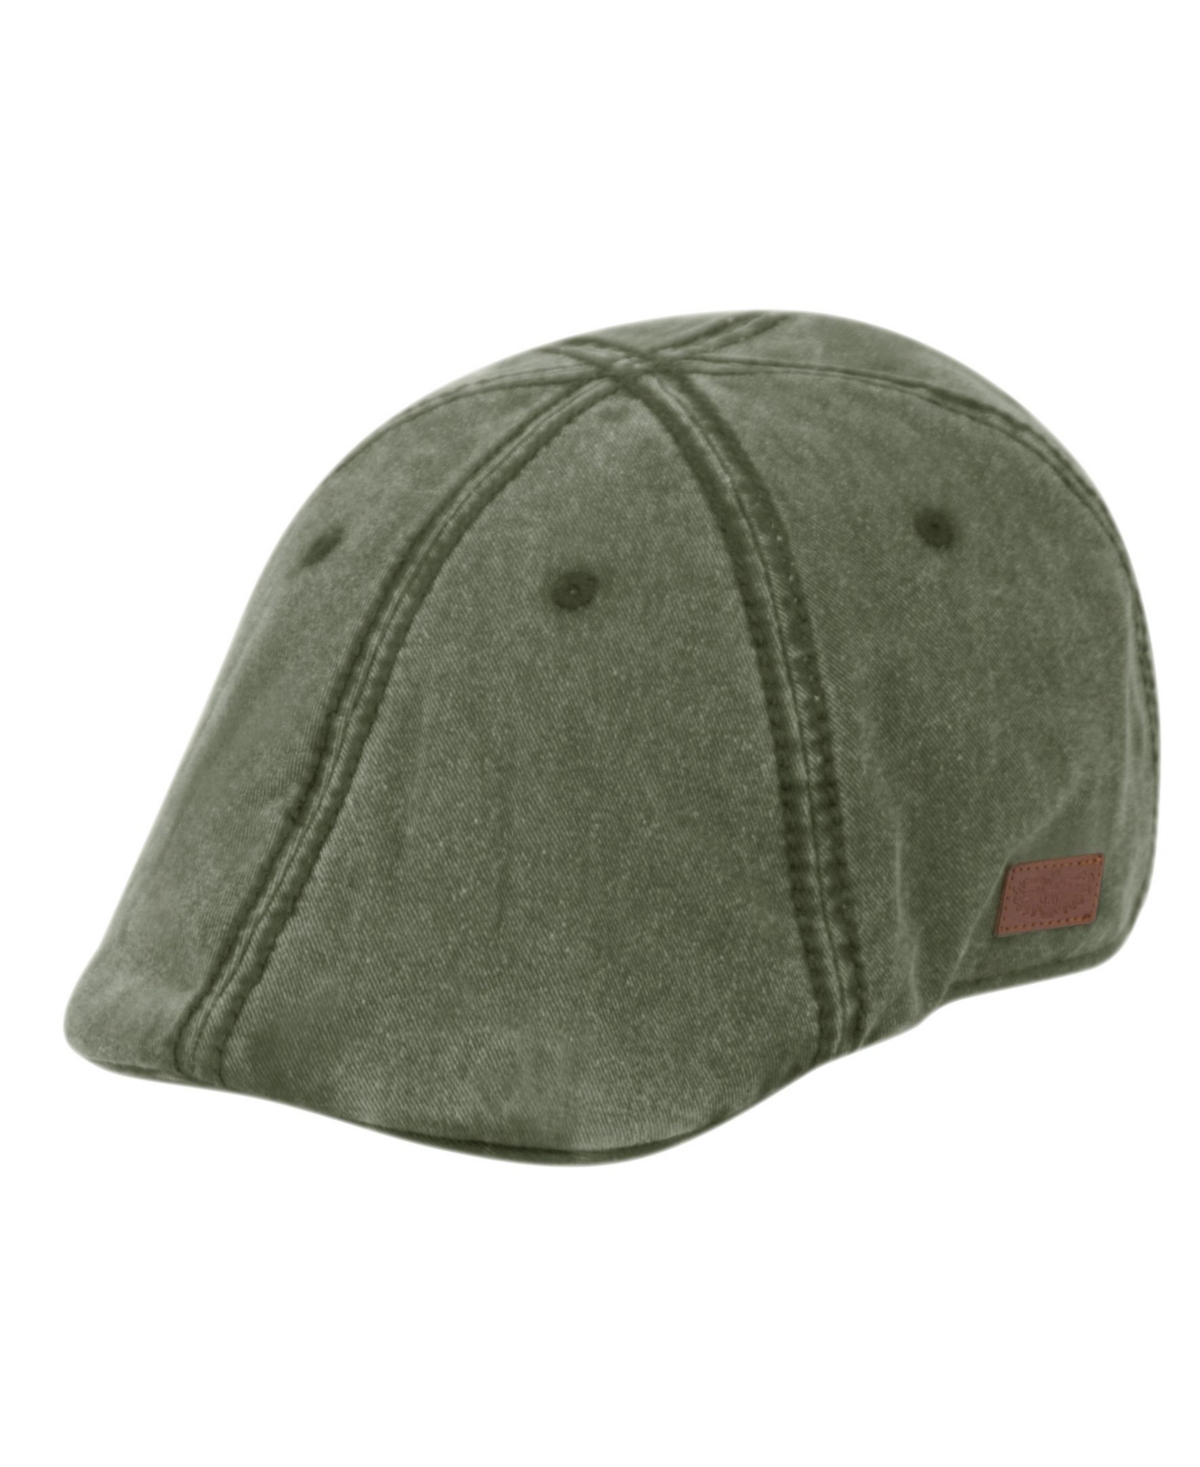 Epoch Hats Company Duckbill Ivy Cap with Stitching